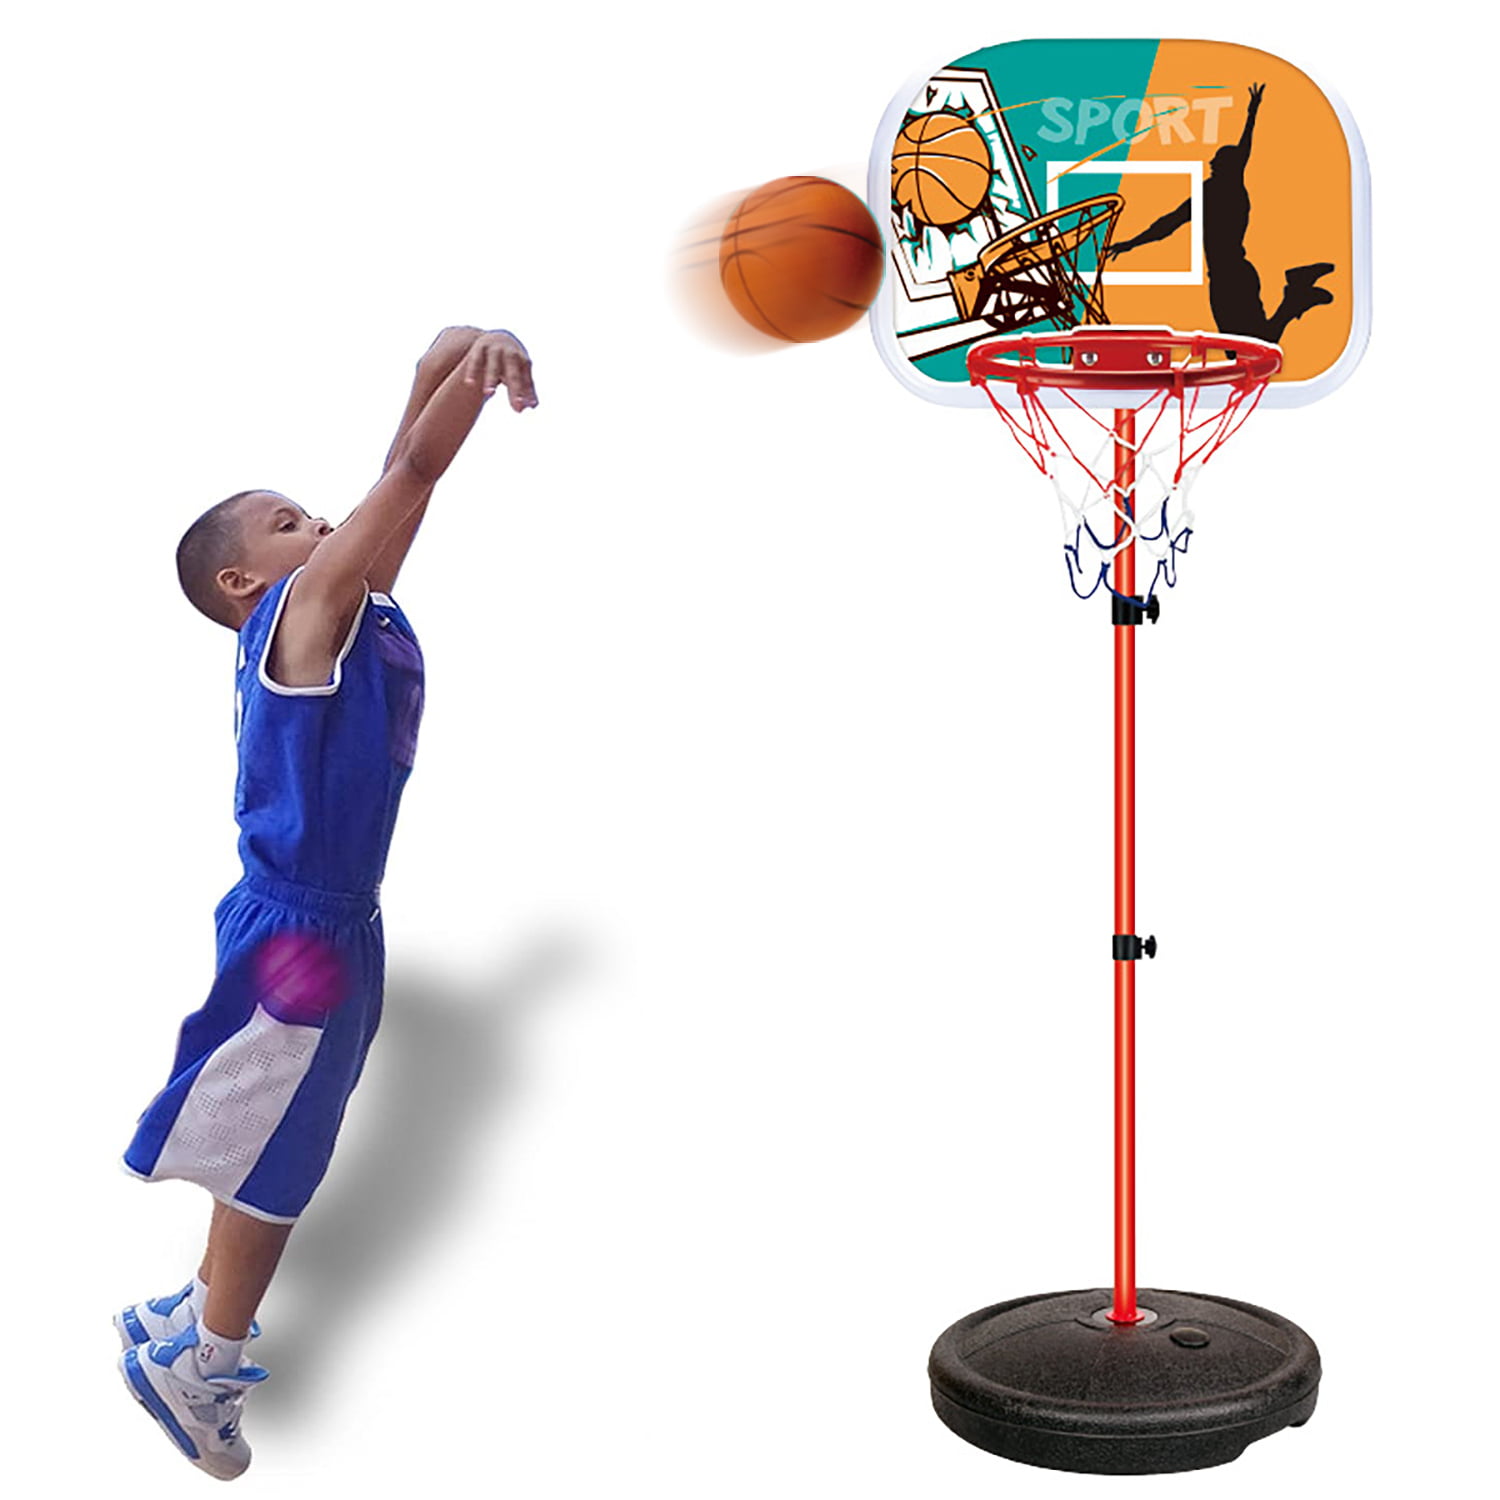 Educational Funny Outdoor Interactive Liftable Basketball Toy for Boys Girls STOBOK 1 Set Plastic Toy Basketball Set 